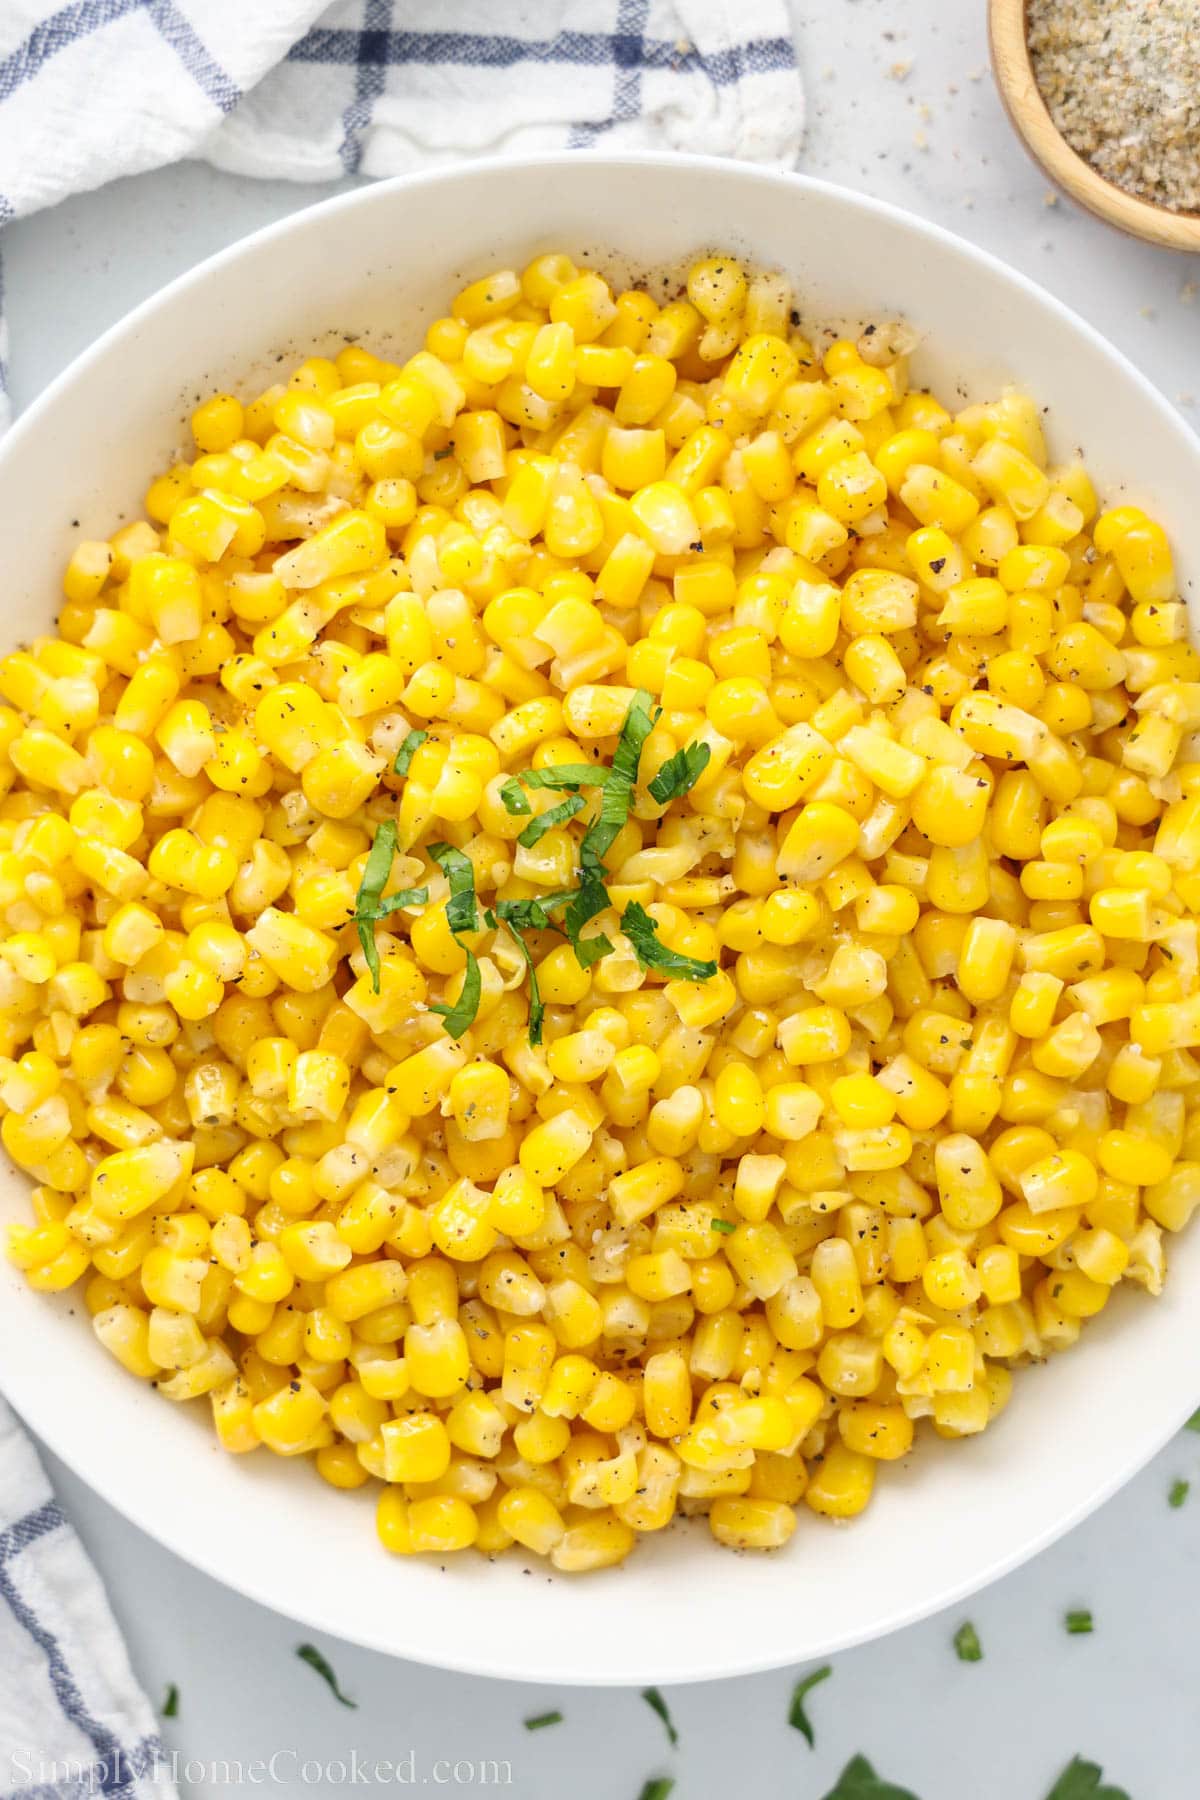 A bowl of Corn topped with chopped parsley.